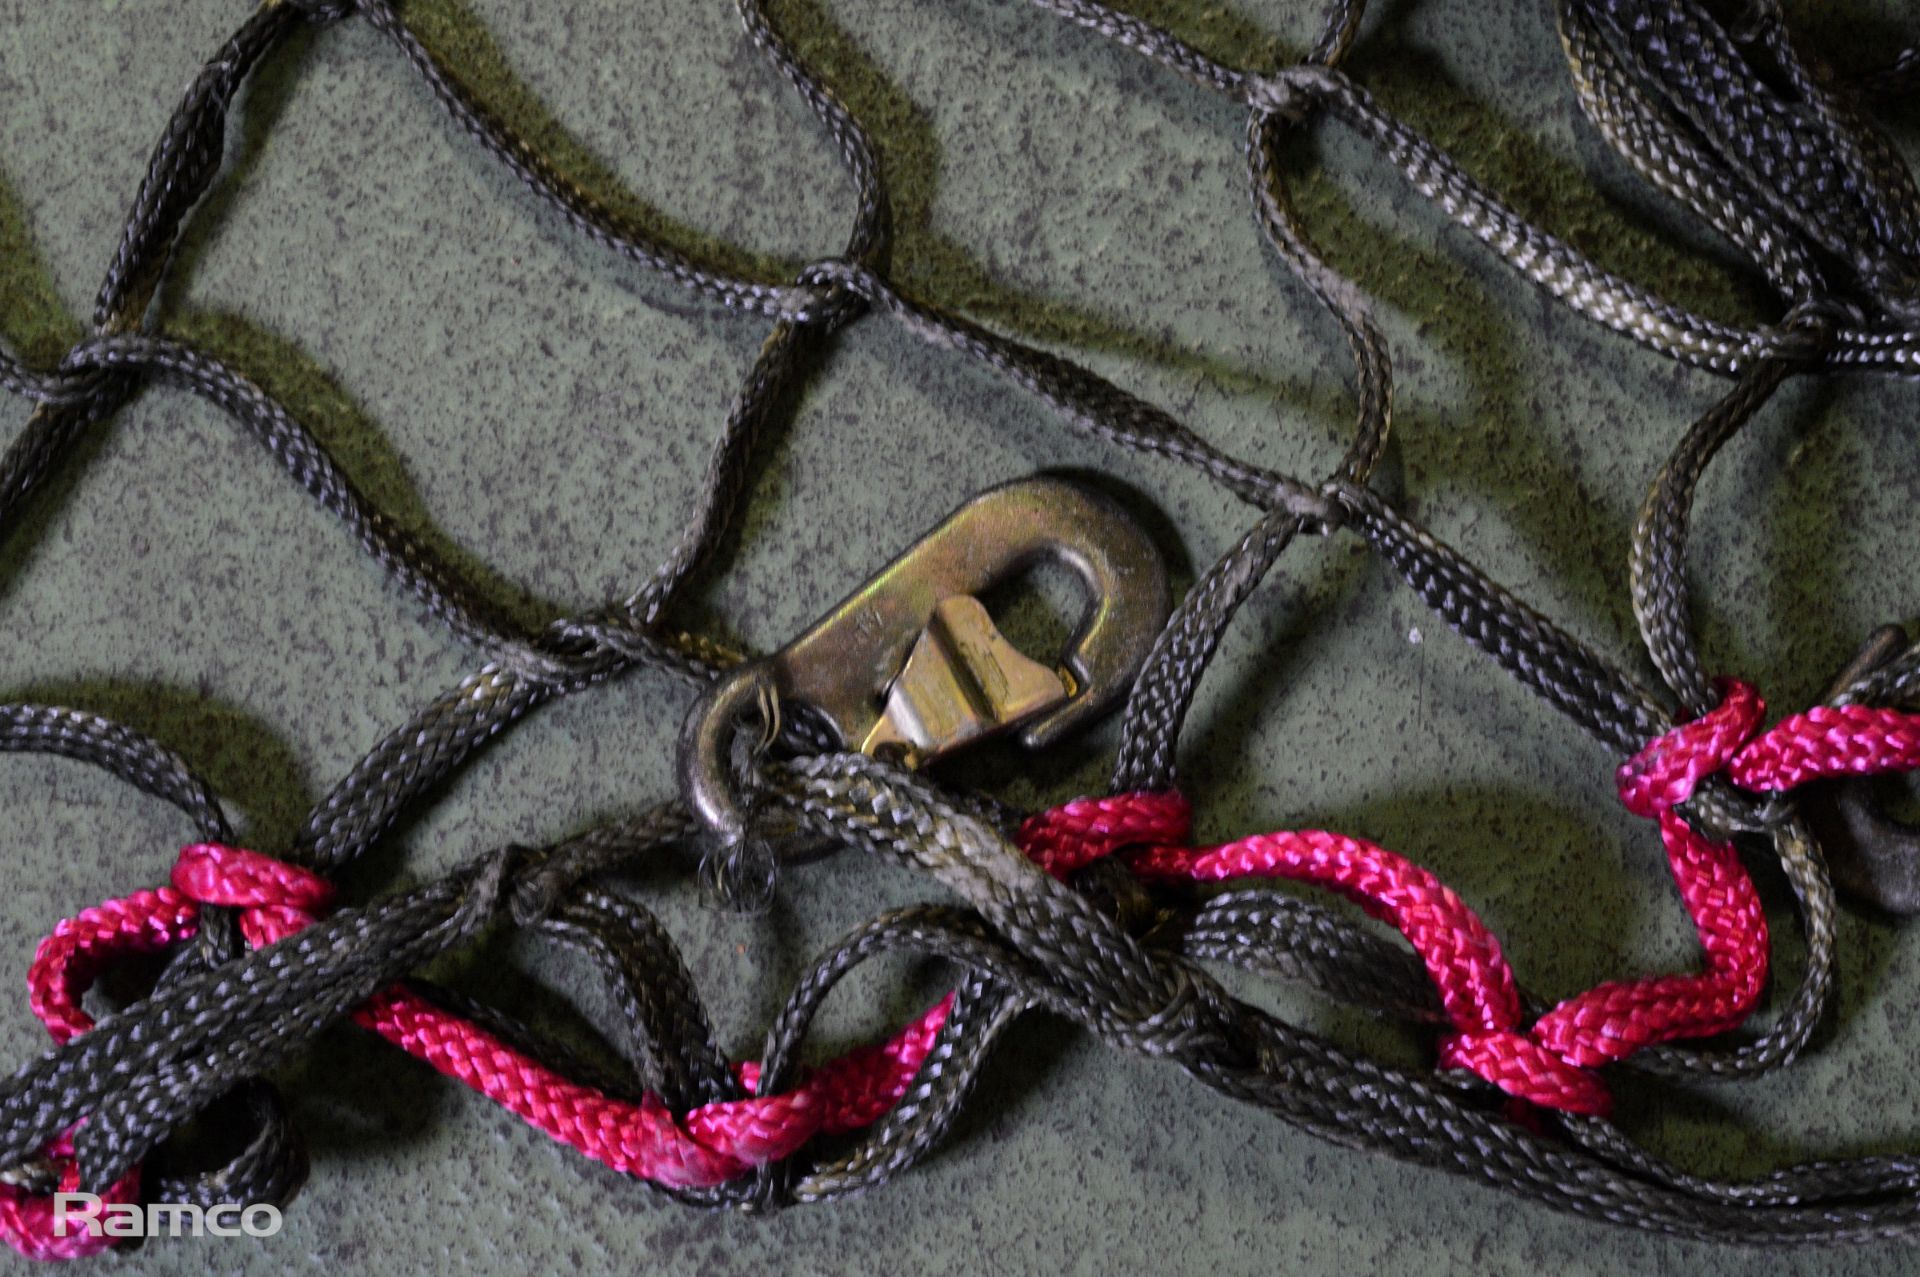 3x Military Cargo Nets - Image 4 of 4